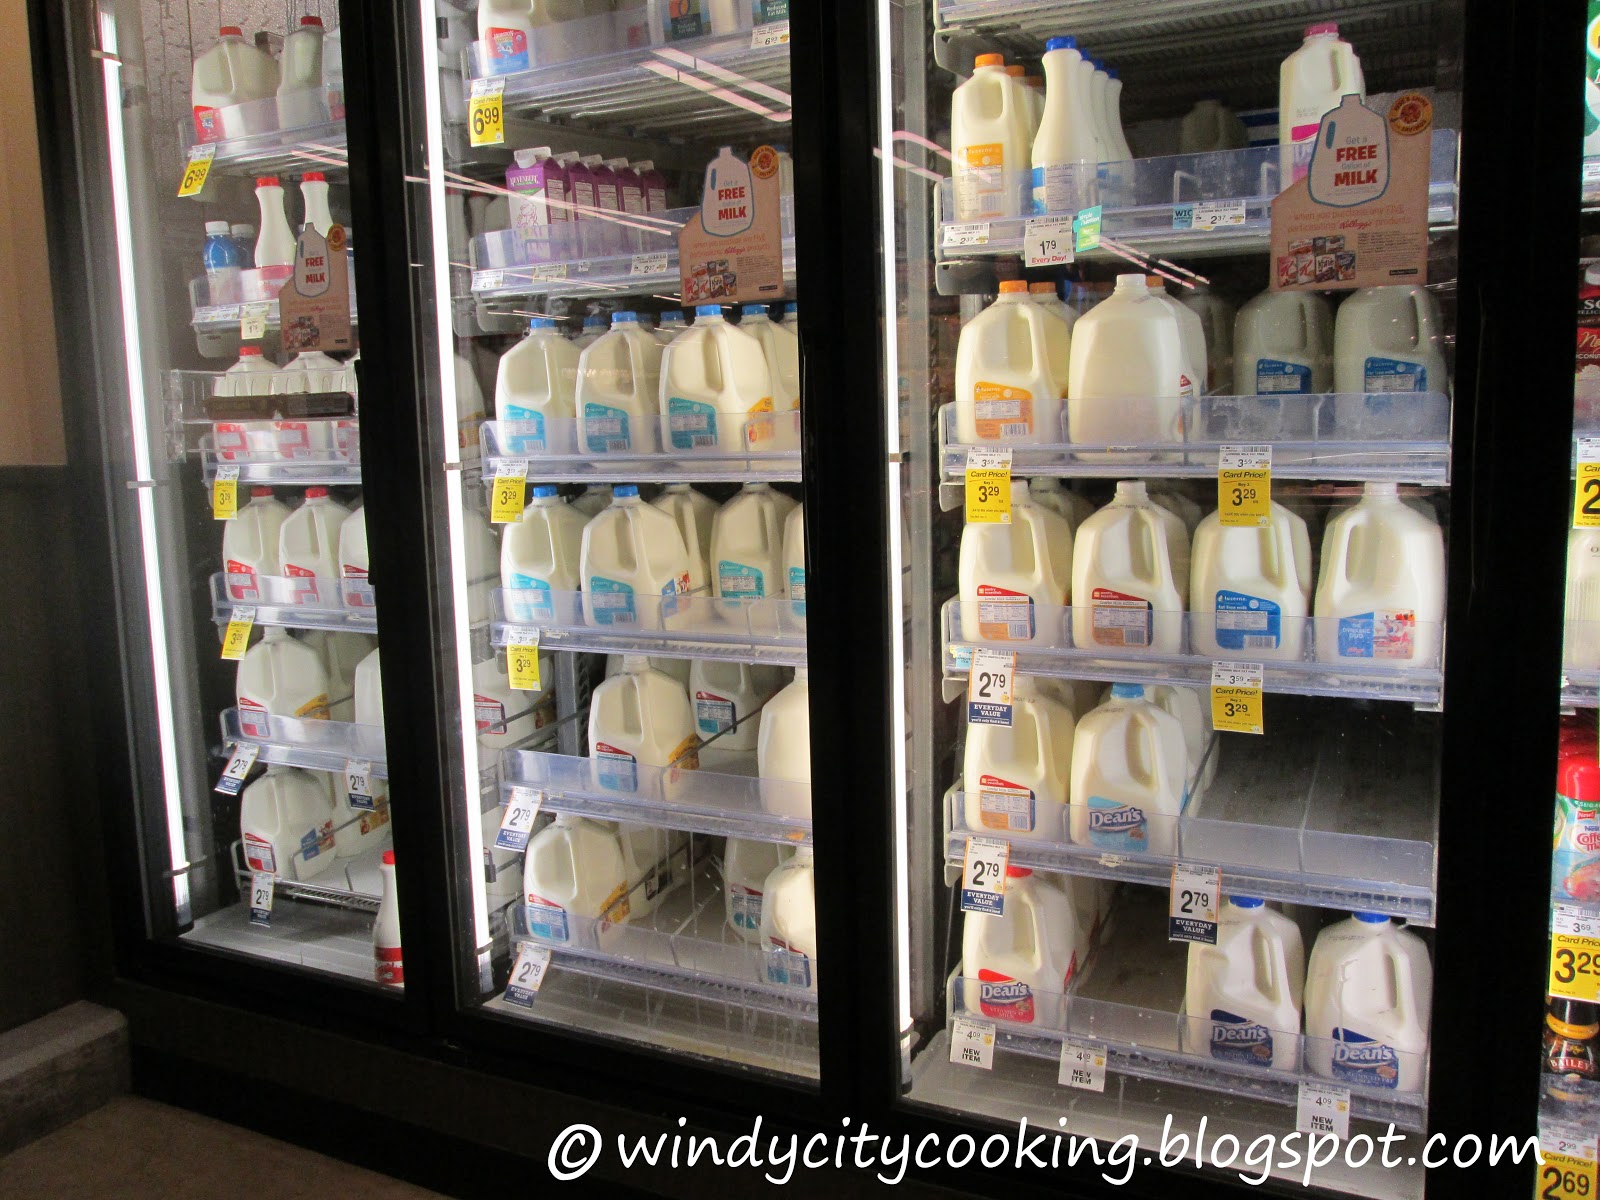 Windy City Cooking: Back on dairy?